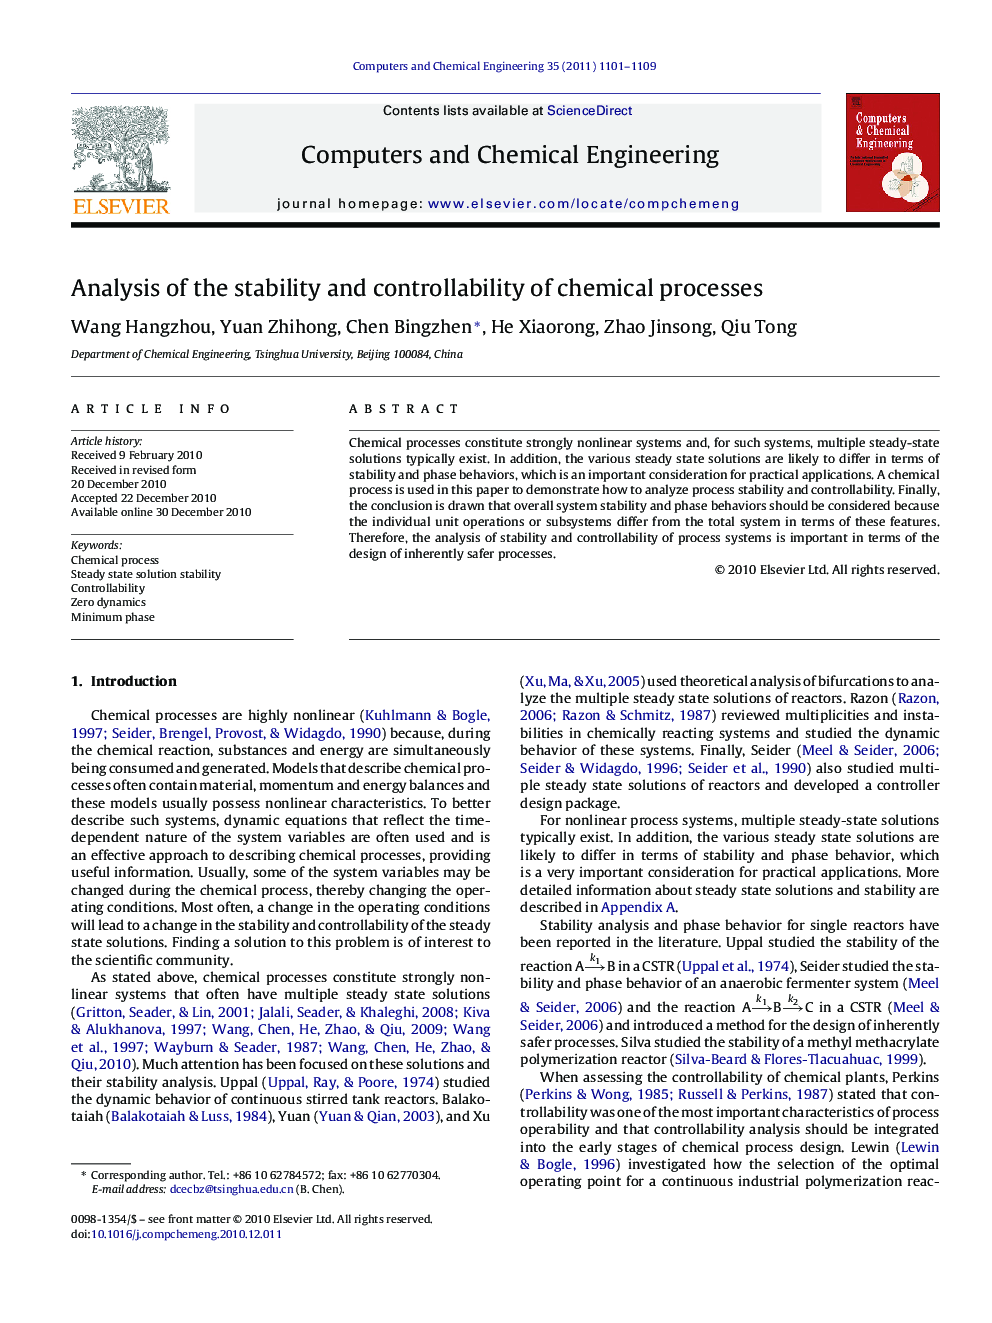 Analysis of the stability and controllability of chemical processes